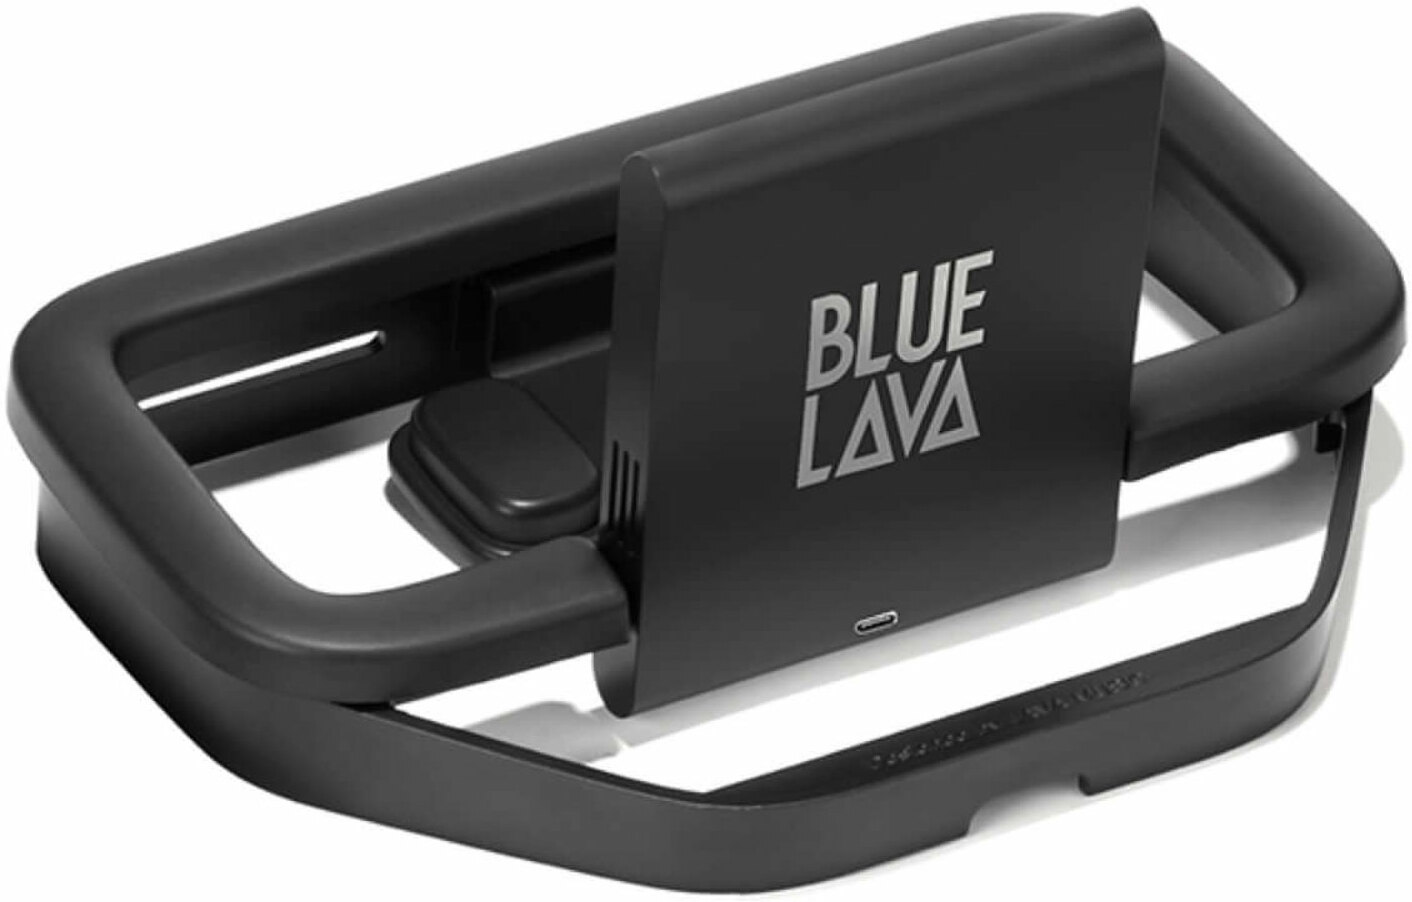 Lava Music Airflow Wireless Charger Blue Lava Guitar Stand - Batería - Main picture